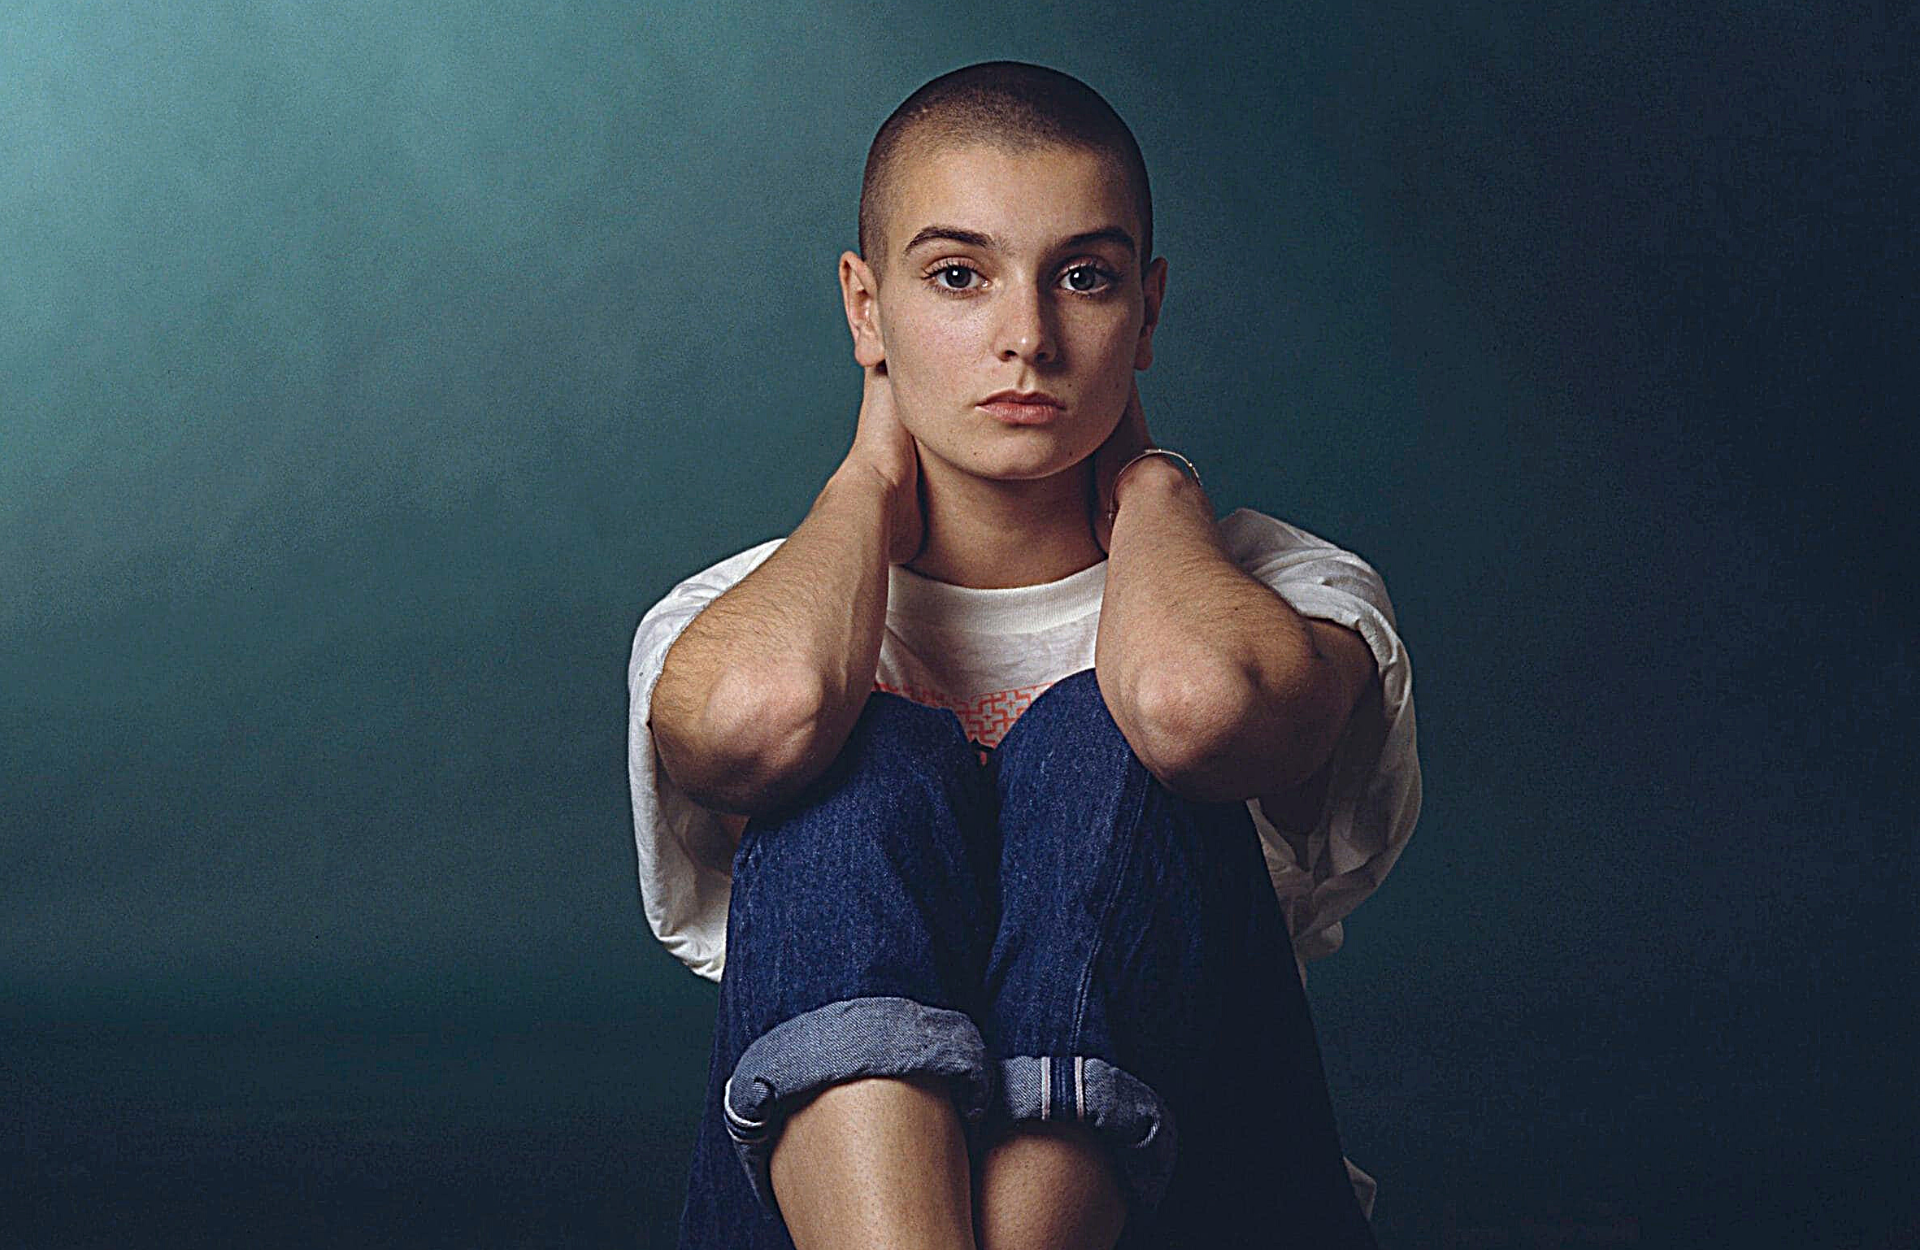 Sinead O’Connor van Nothing Compares to You overleden